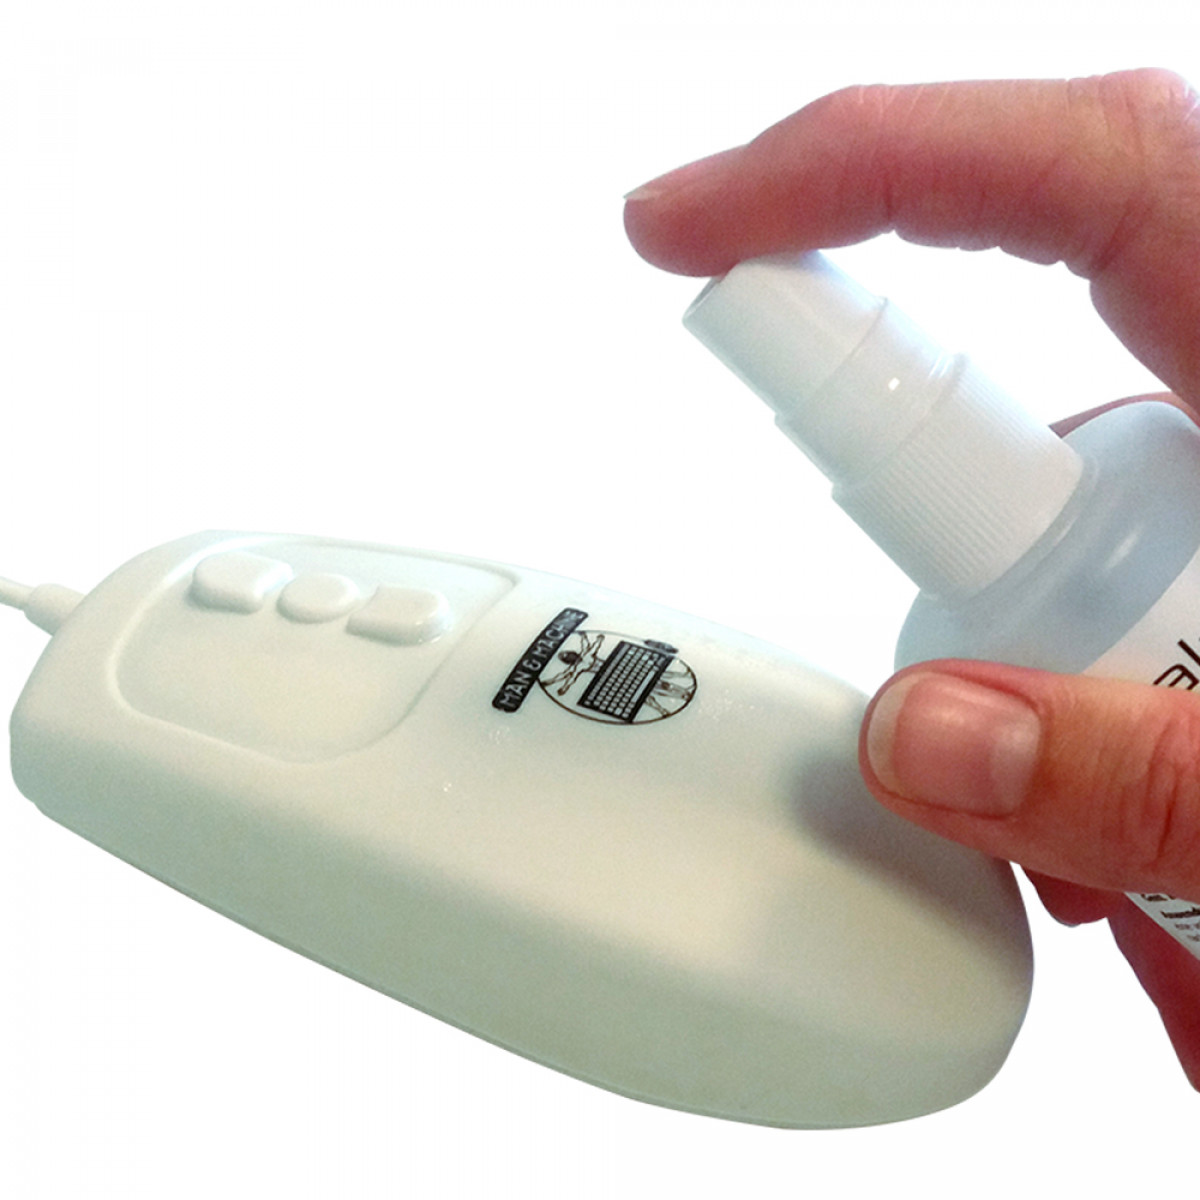 Mighty Mouse - useable with hospital approved disinfectants